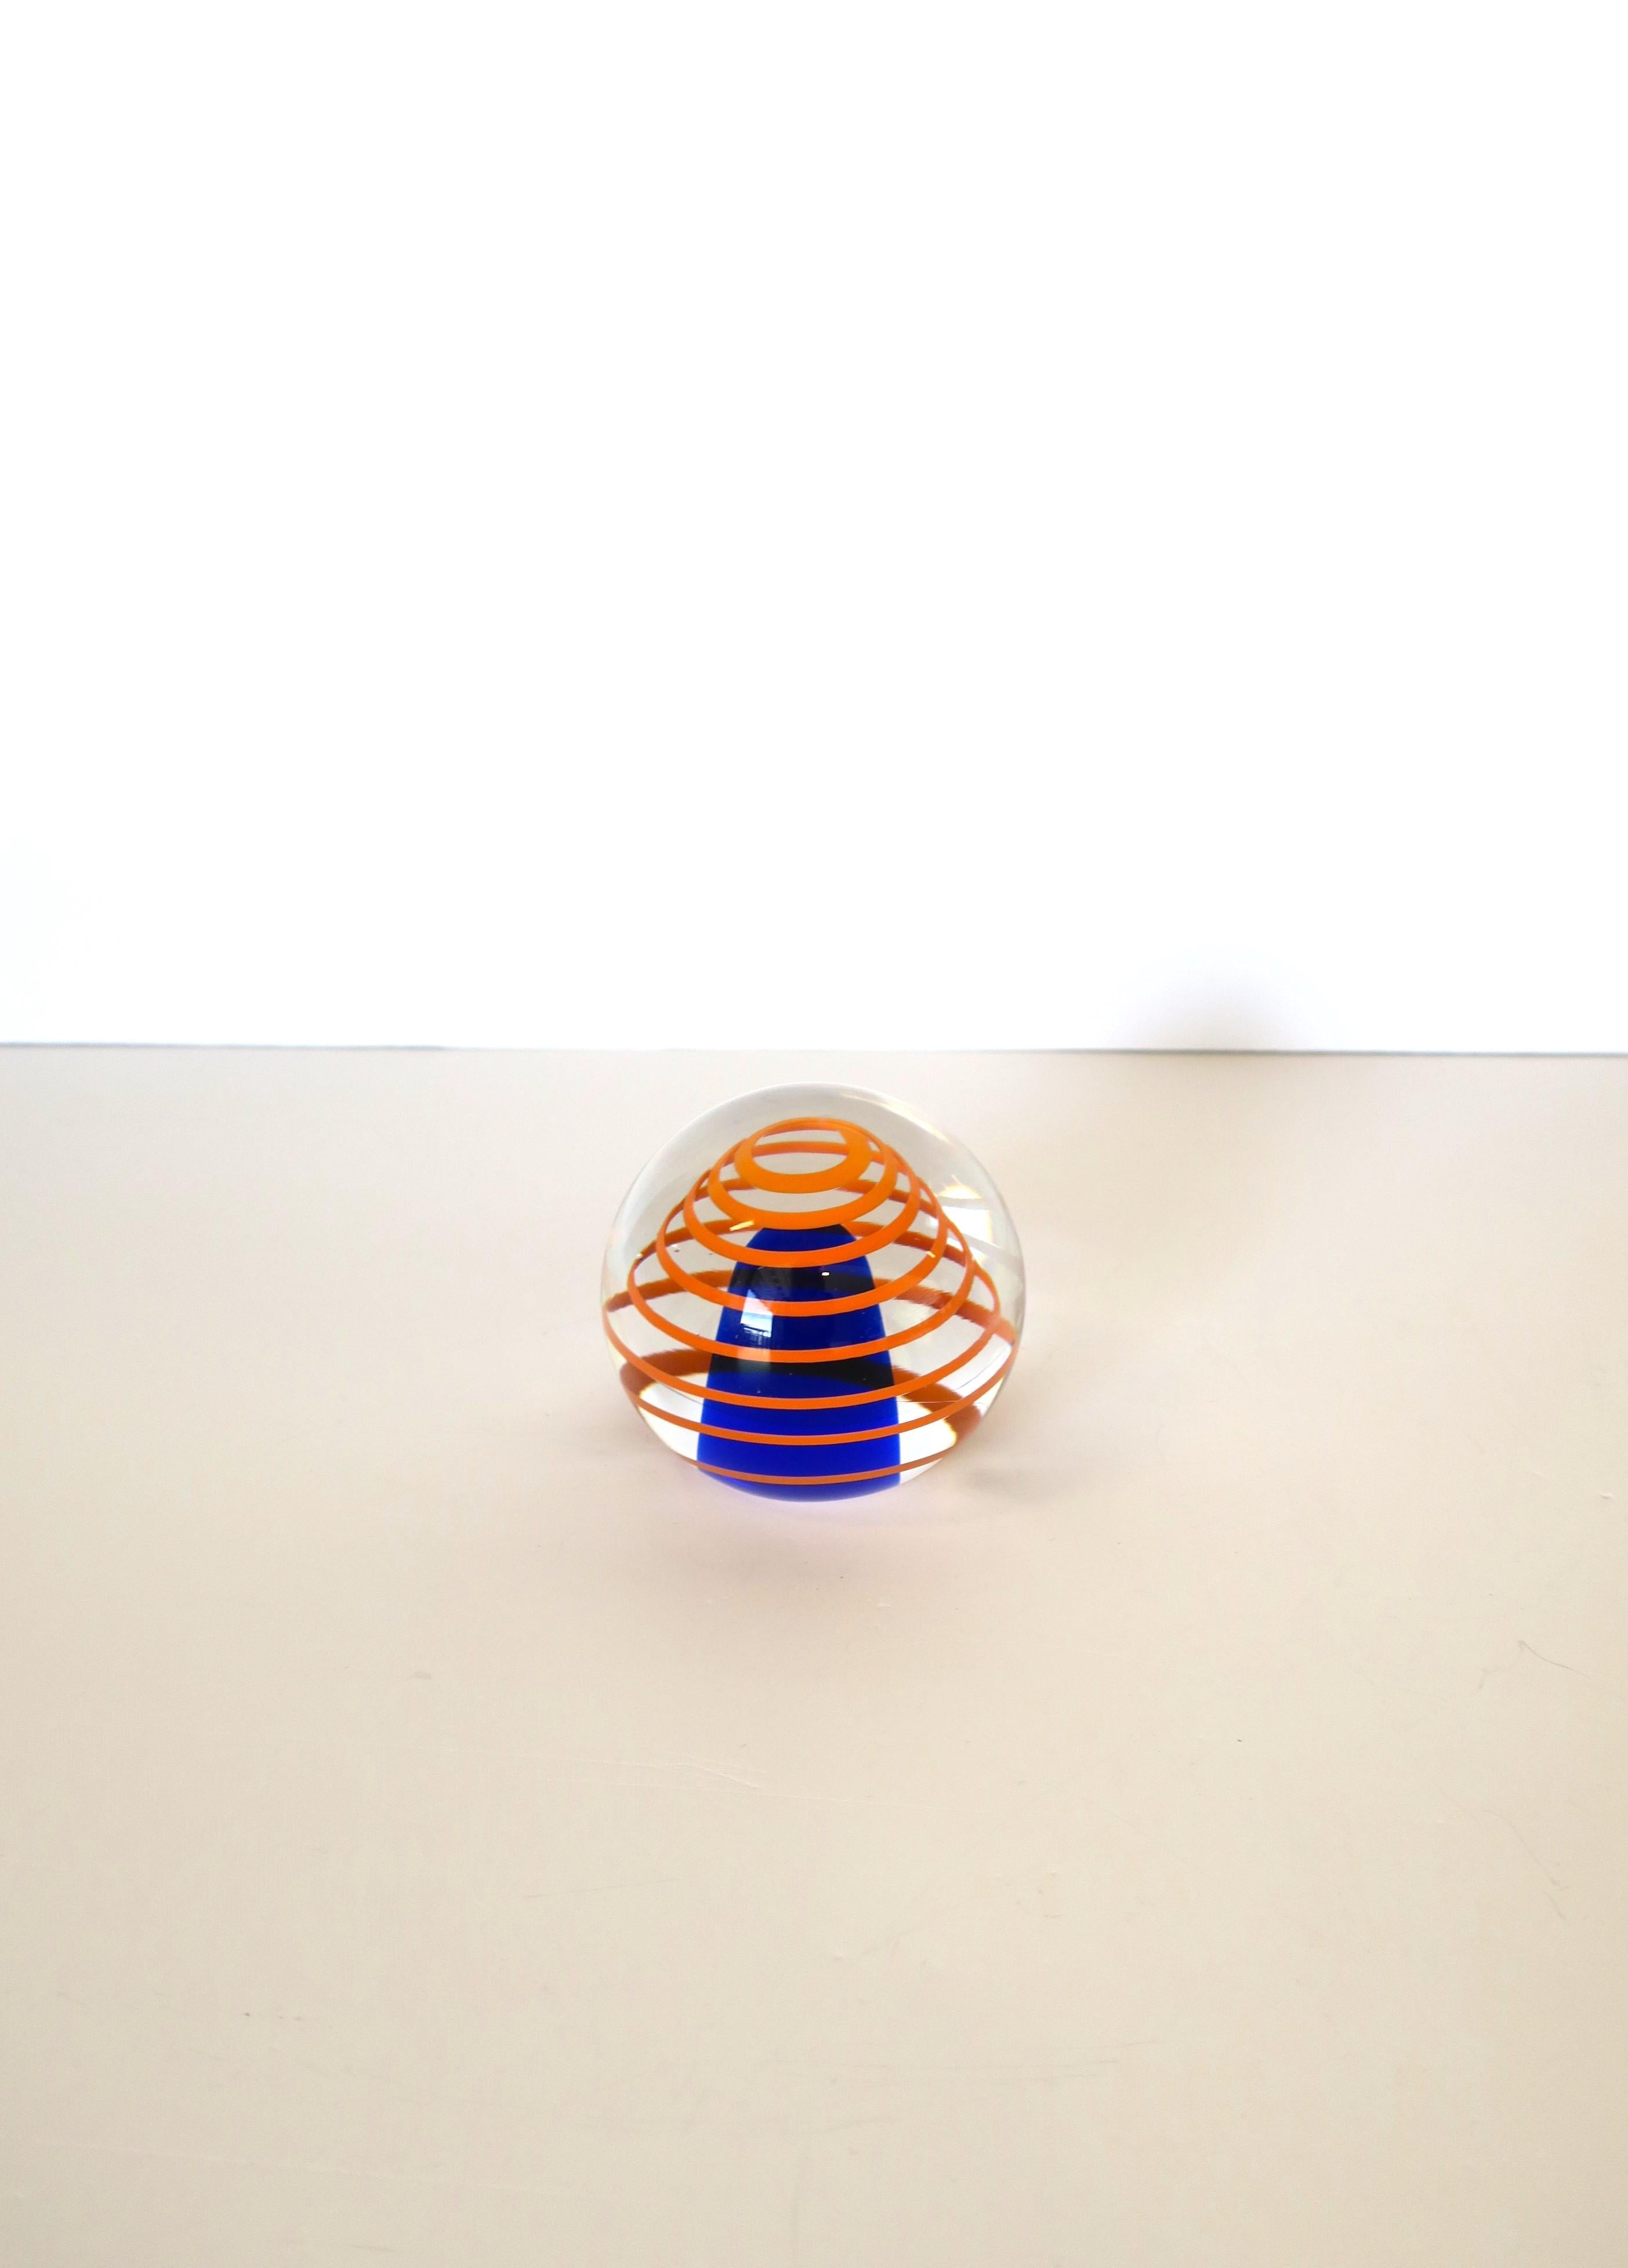 Czech Orange and Blue Art Glass Sphere Paperweight Decorative Object Signed For Sale